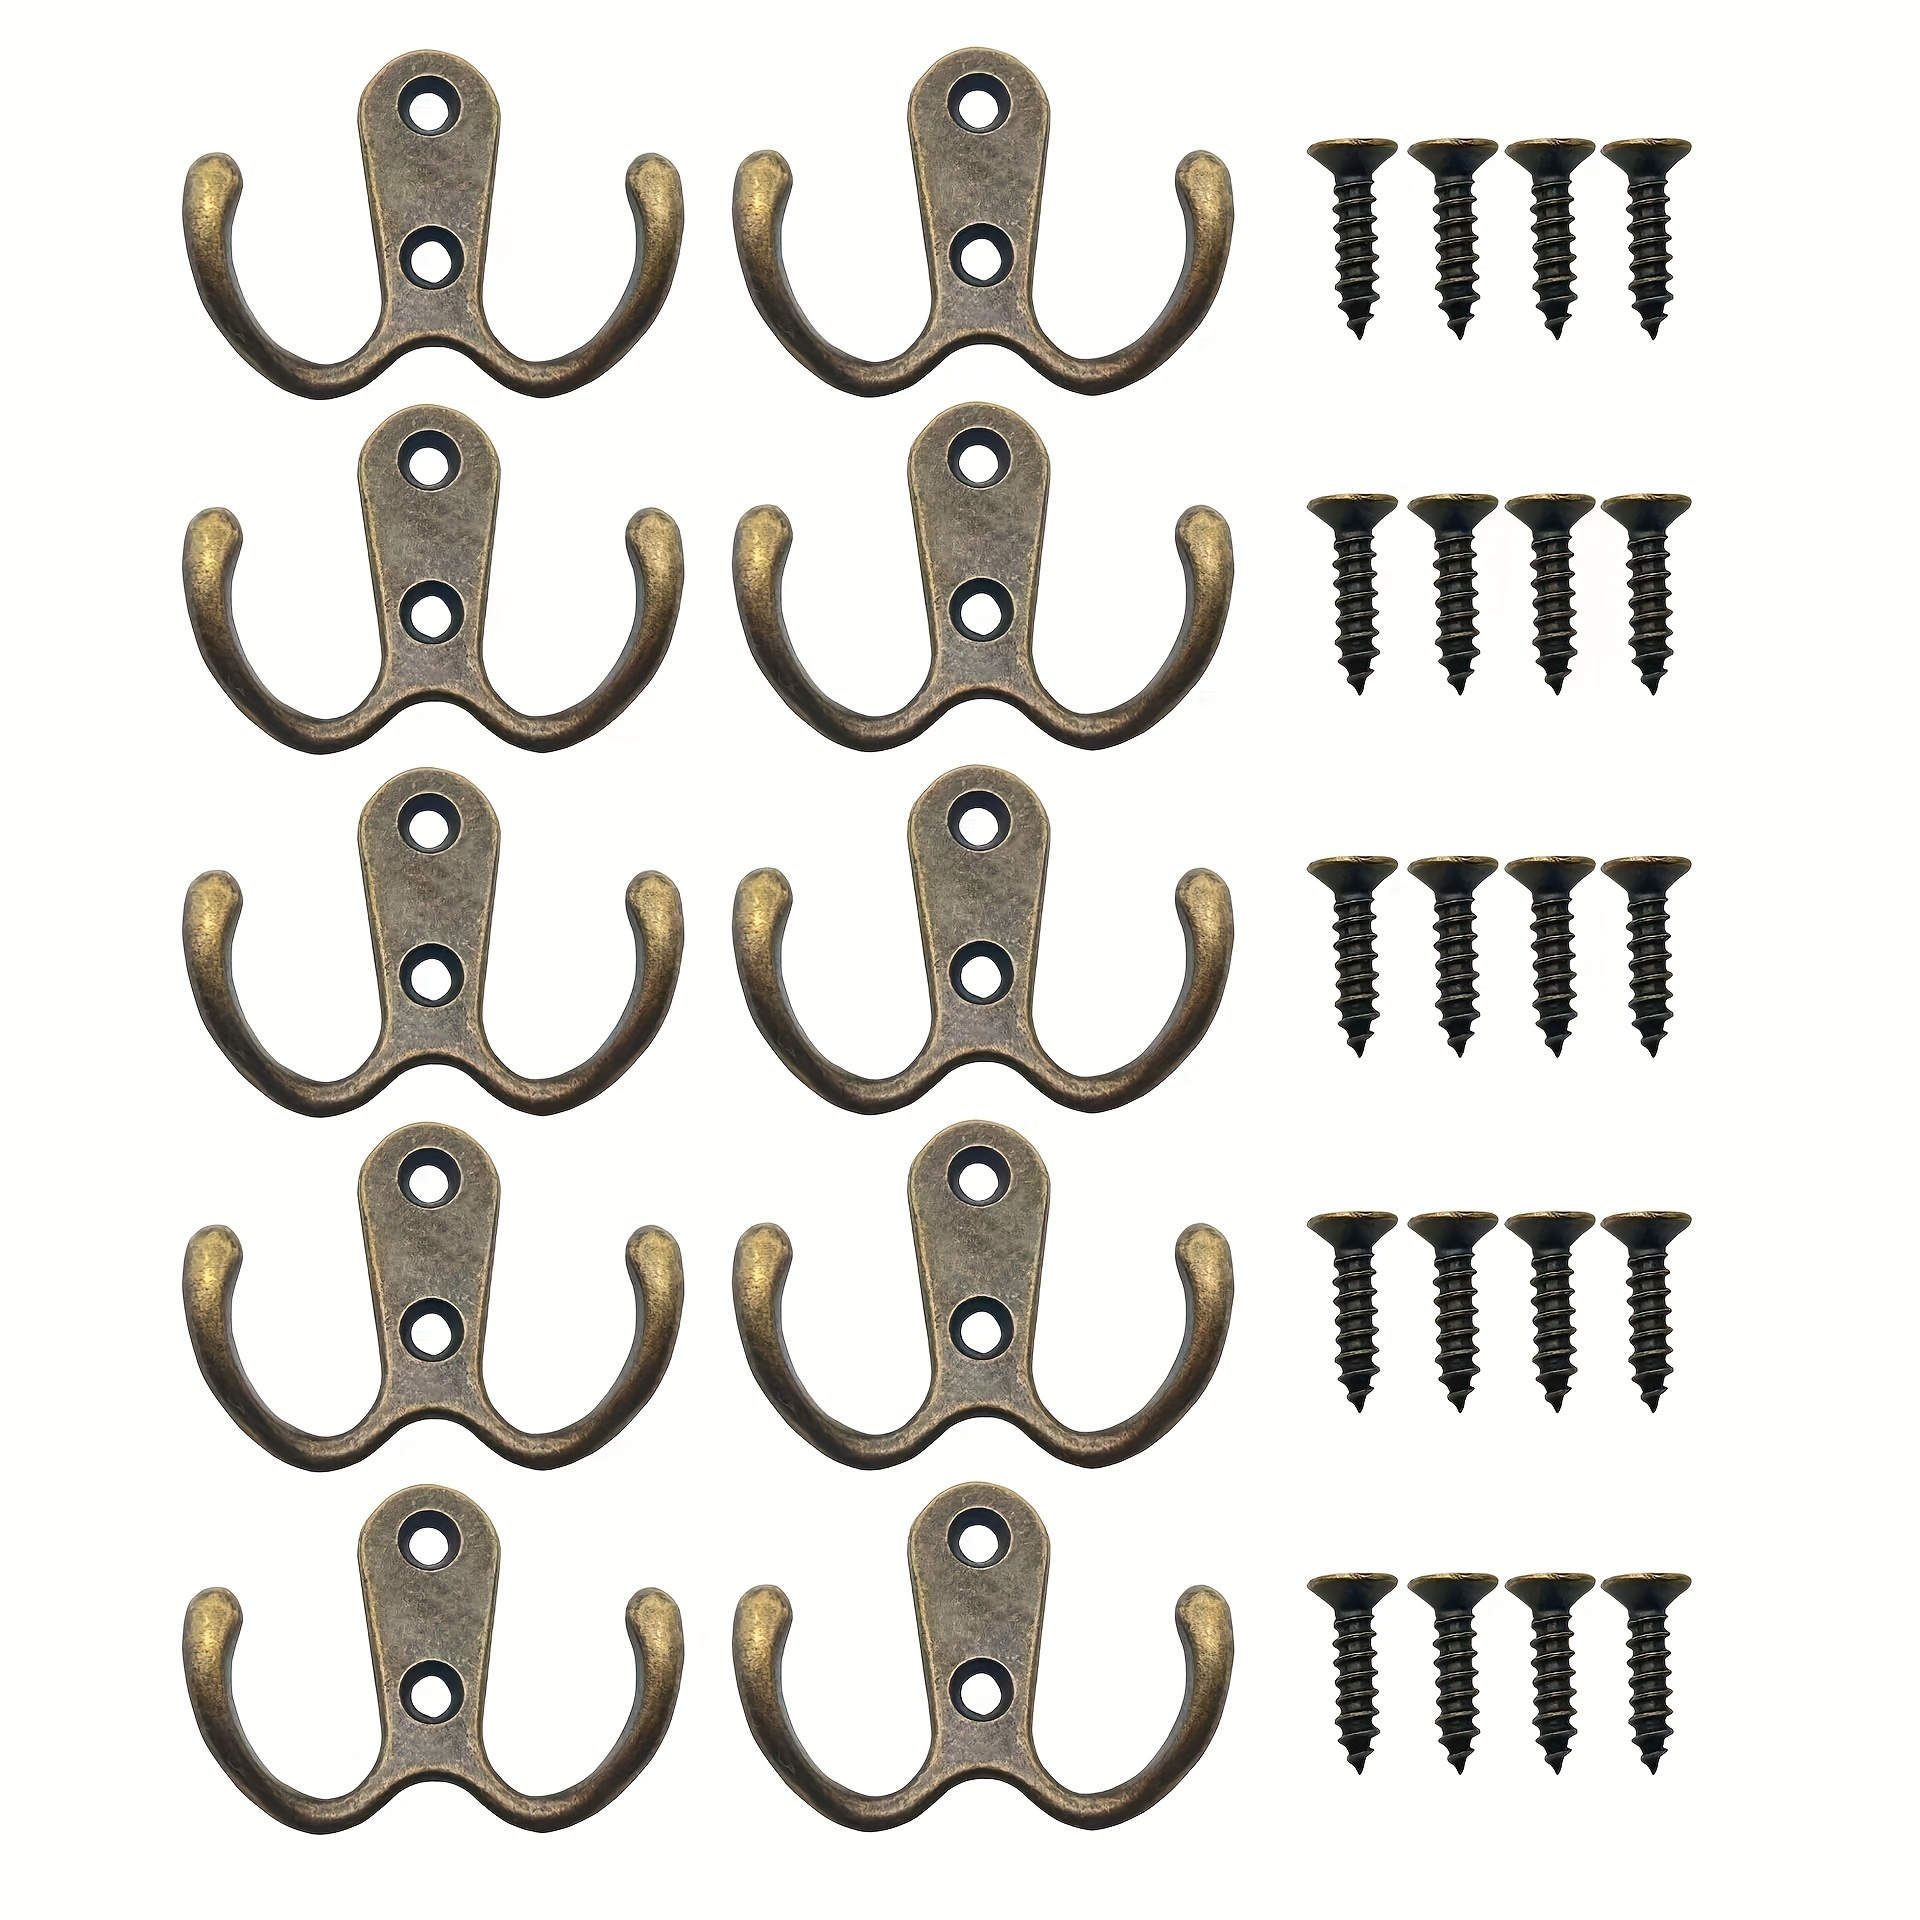 10pcs Wall Hooks Coat Hooks, Hooks For Hanging Towels Clothes, Double-head  Wall Mounted Decorative Coat Hanger With Screws, Suitable Storage Organizer